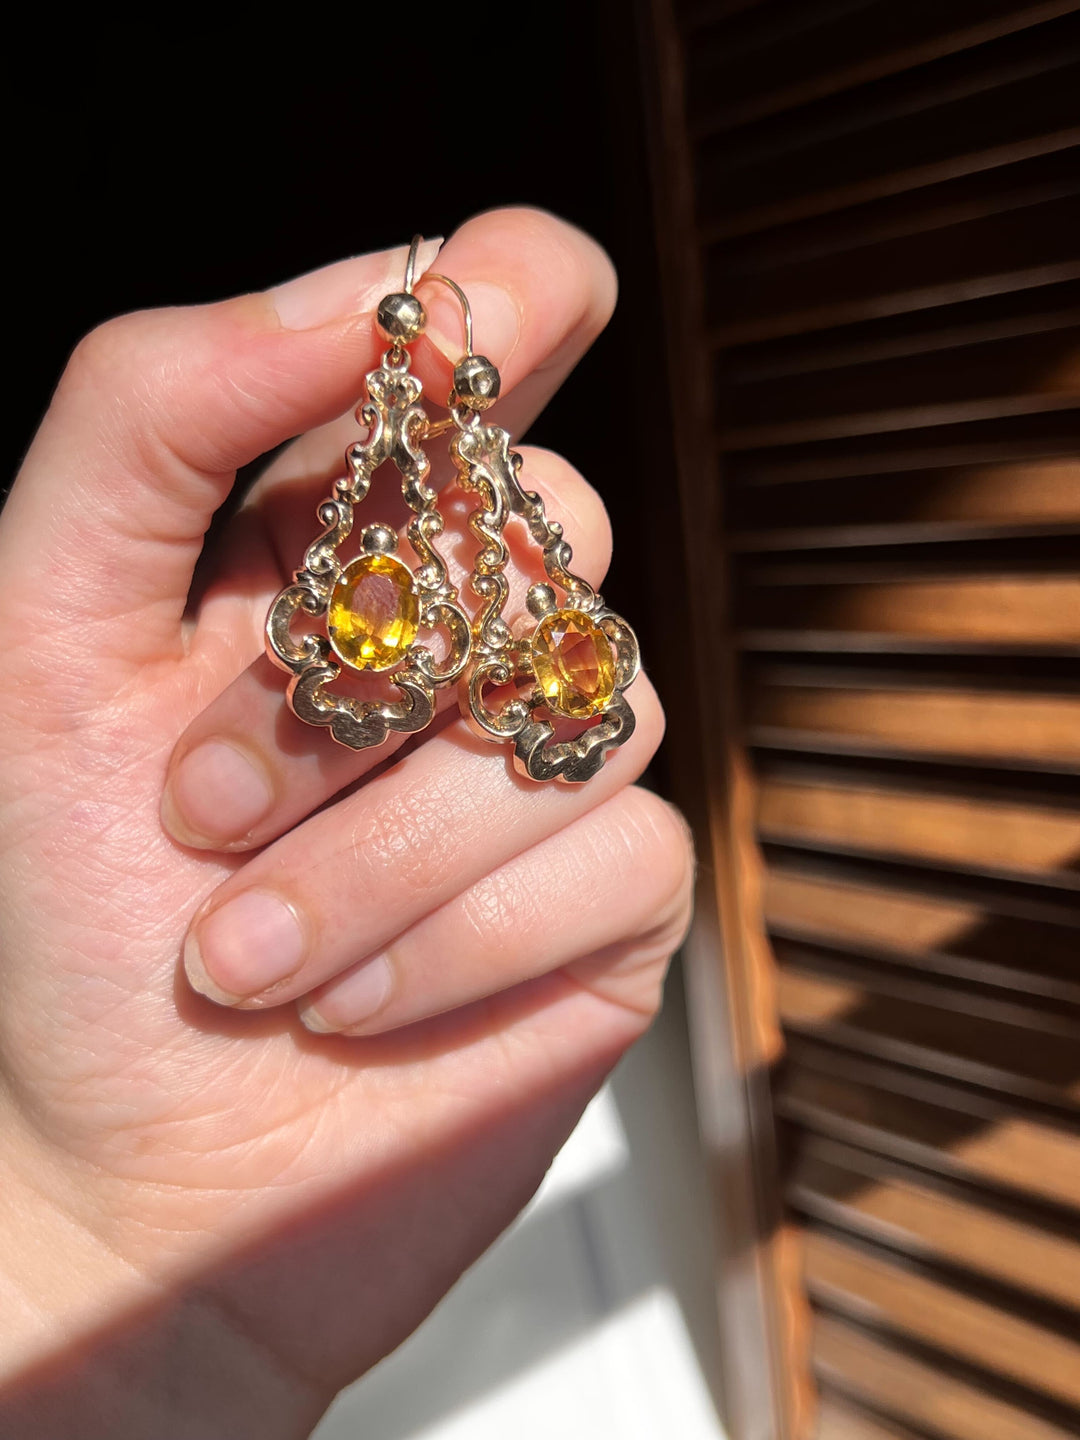 Superb Early Victorian 9k Earrings with Stunning Citrines